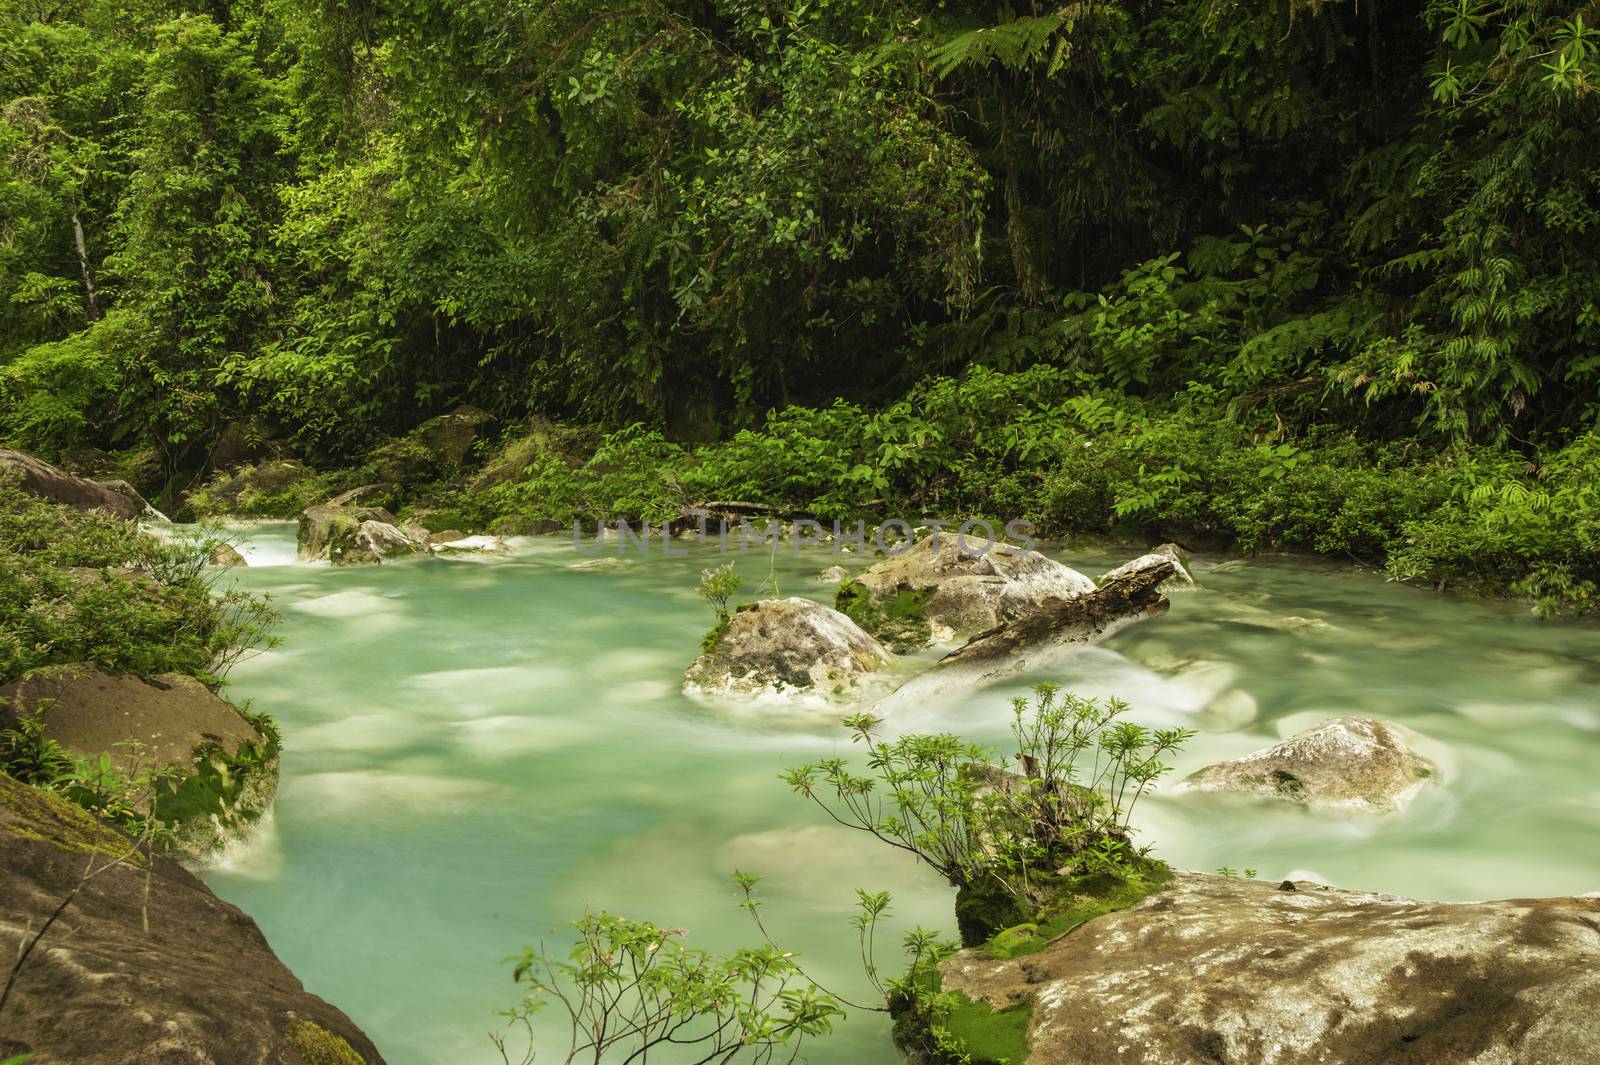 Flowing Waters of Rio Celeste by billberryphotography